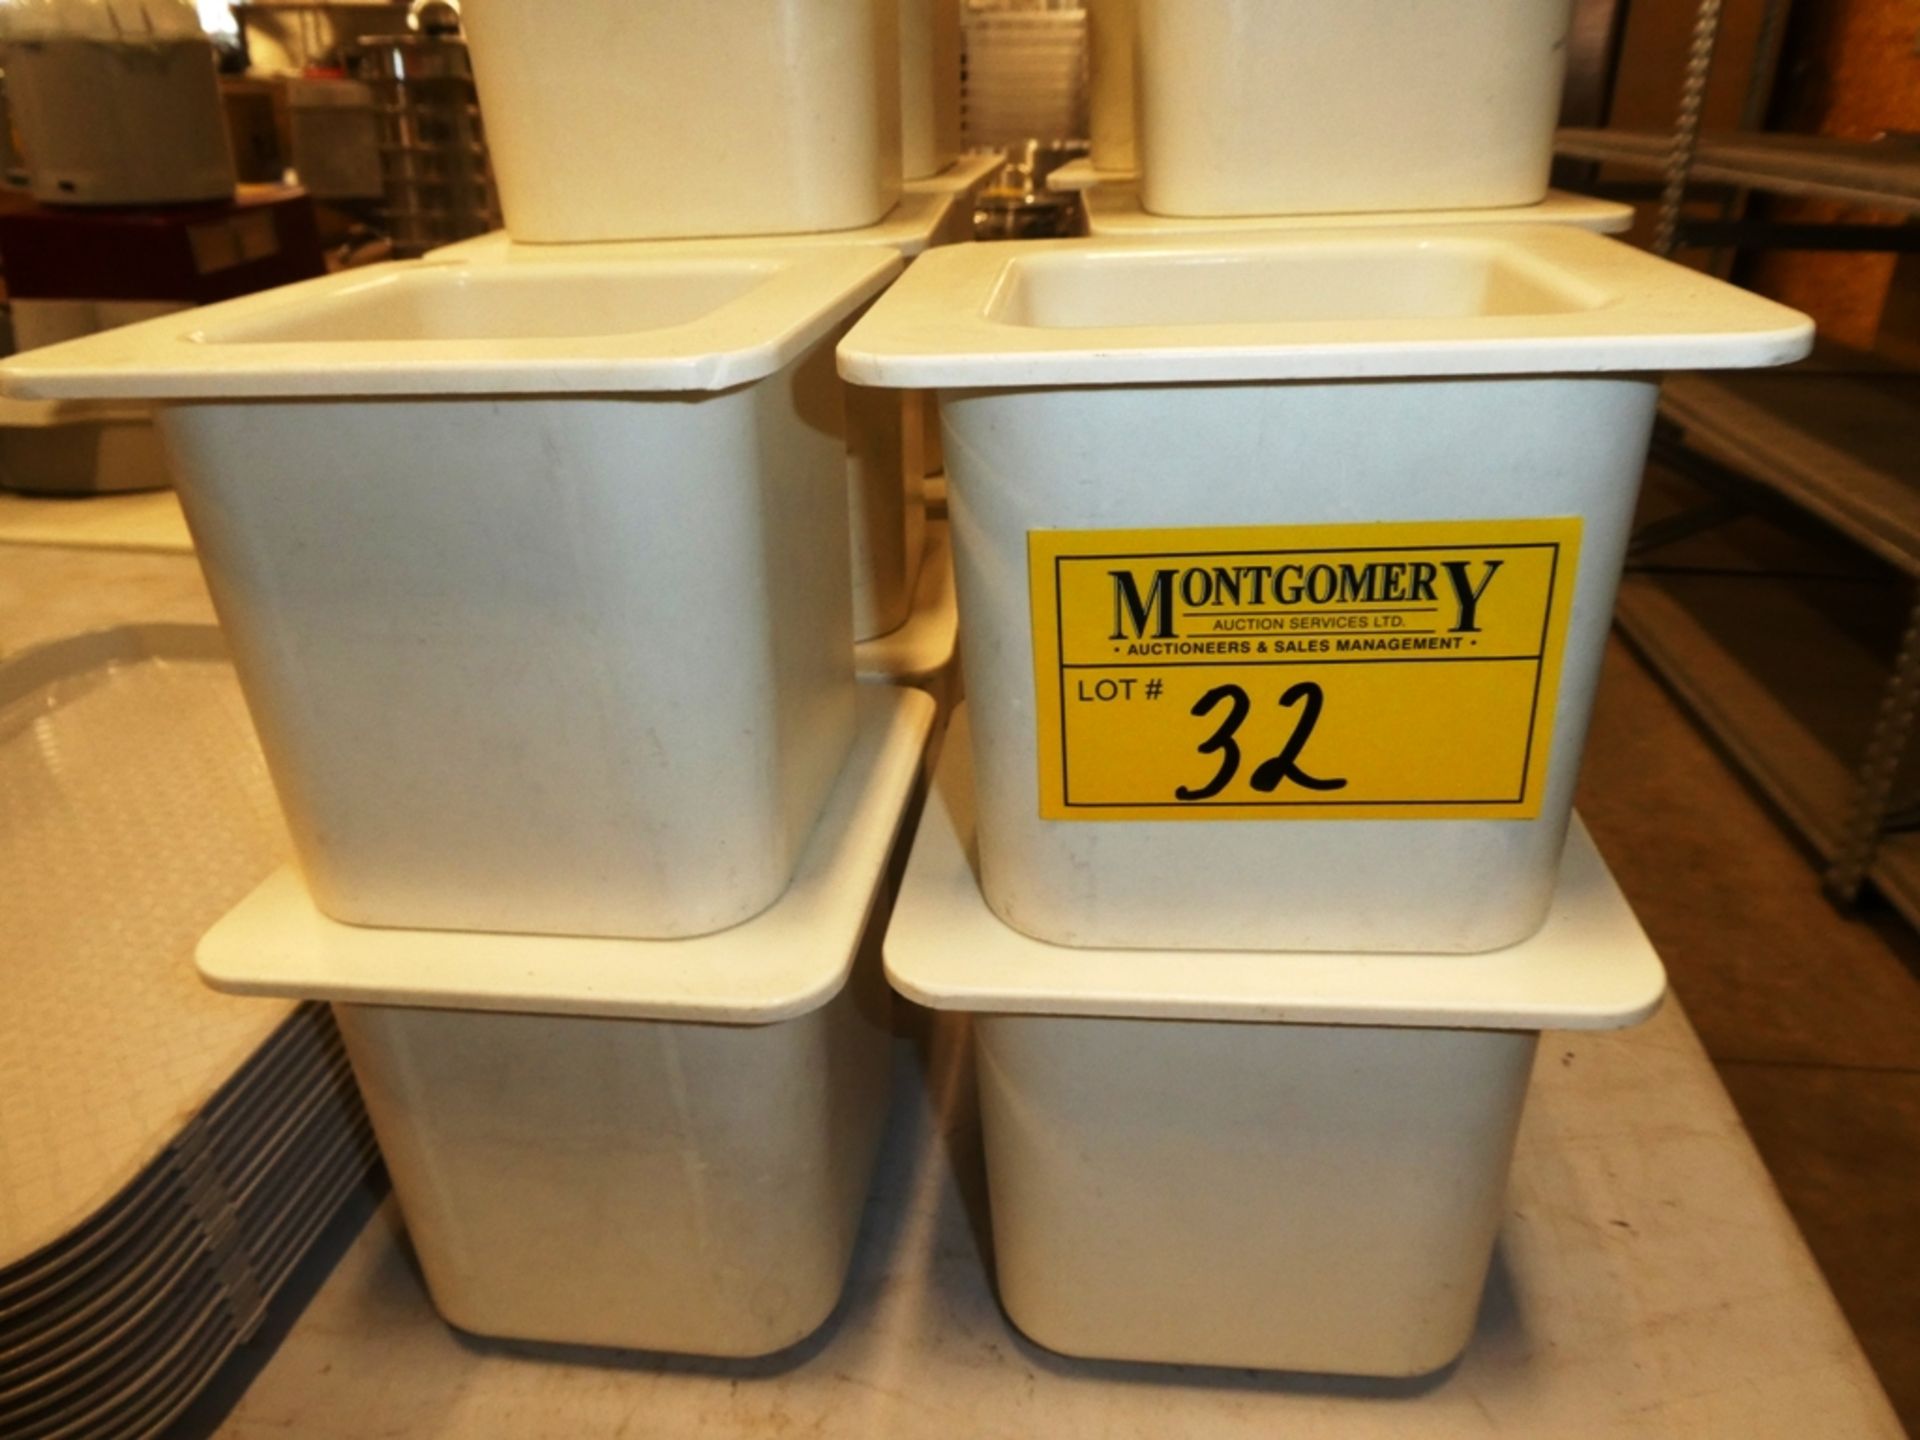 L/O 16 CAMBRO 66CF110 COLDFEST 6" DEEP FOOD PANS, STACKABLE - Image 2 of 3